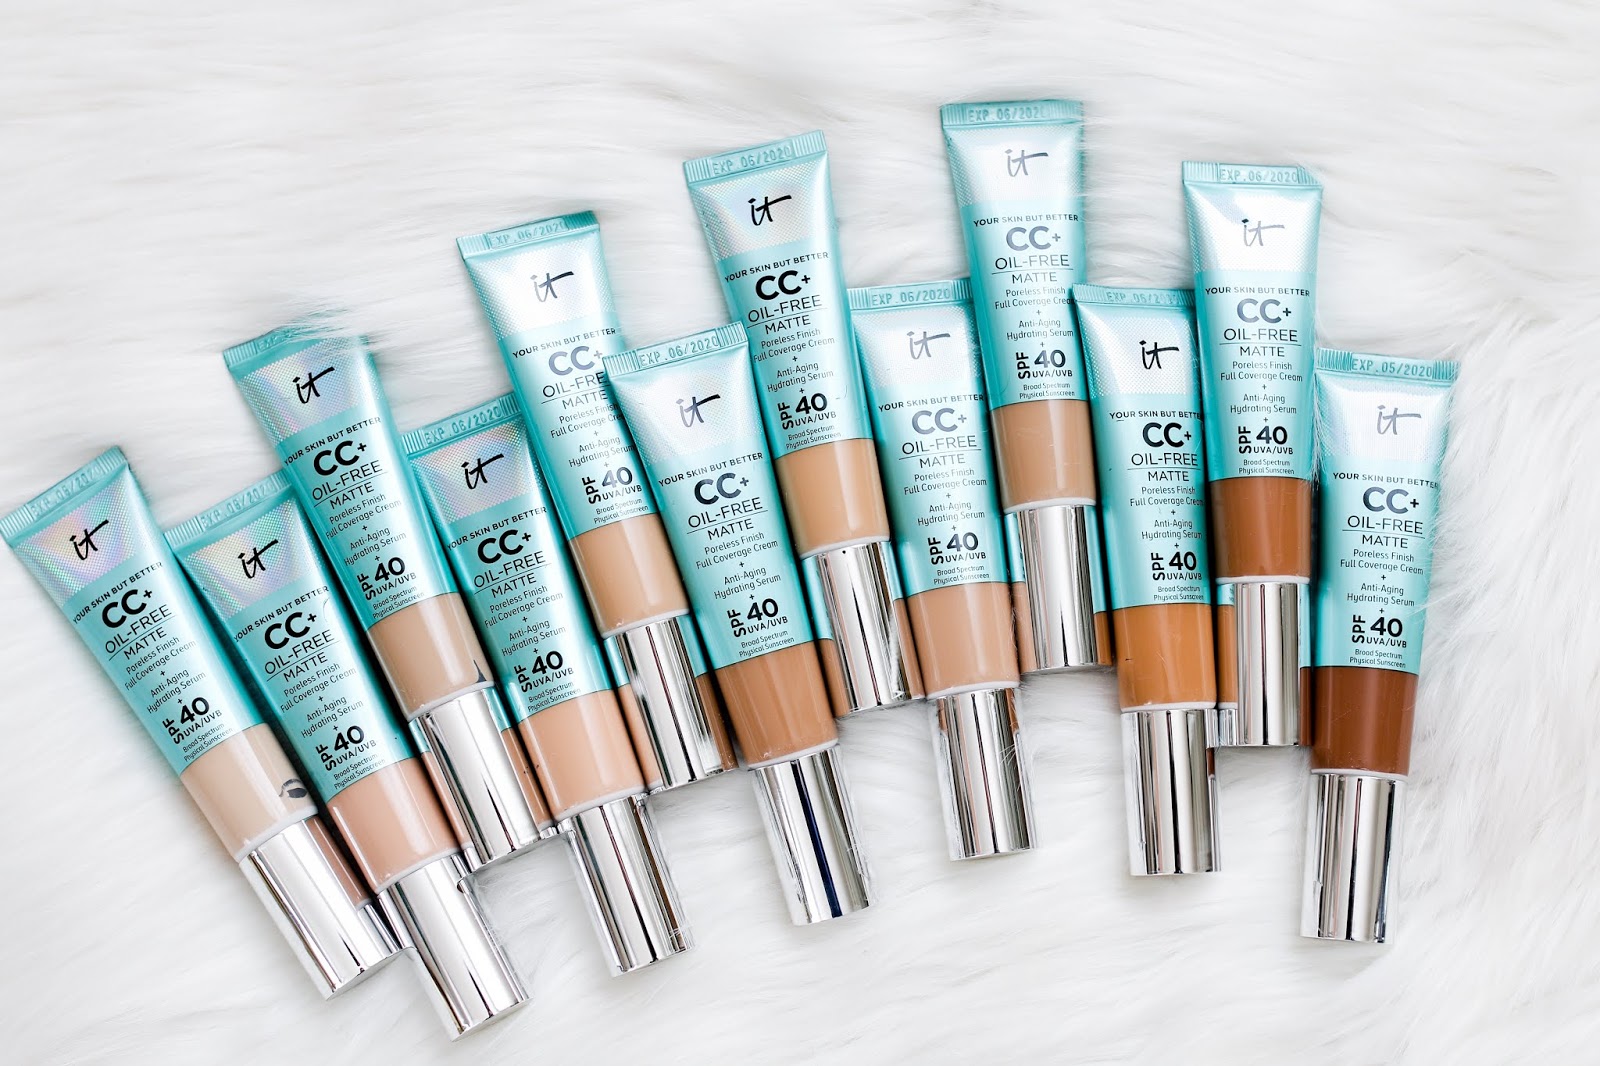 New Cosmetics CC Cream Oil-Free Matte With Swatches Every Shade alittlebitetc